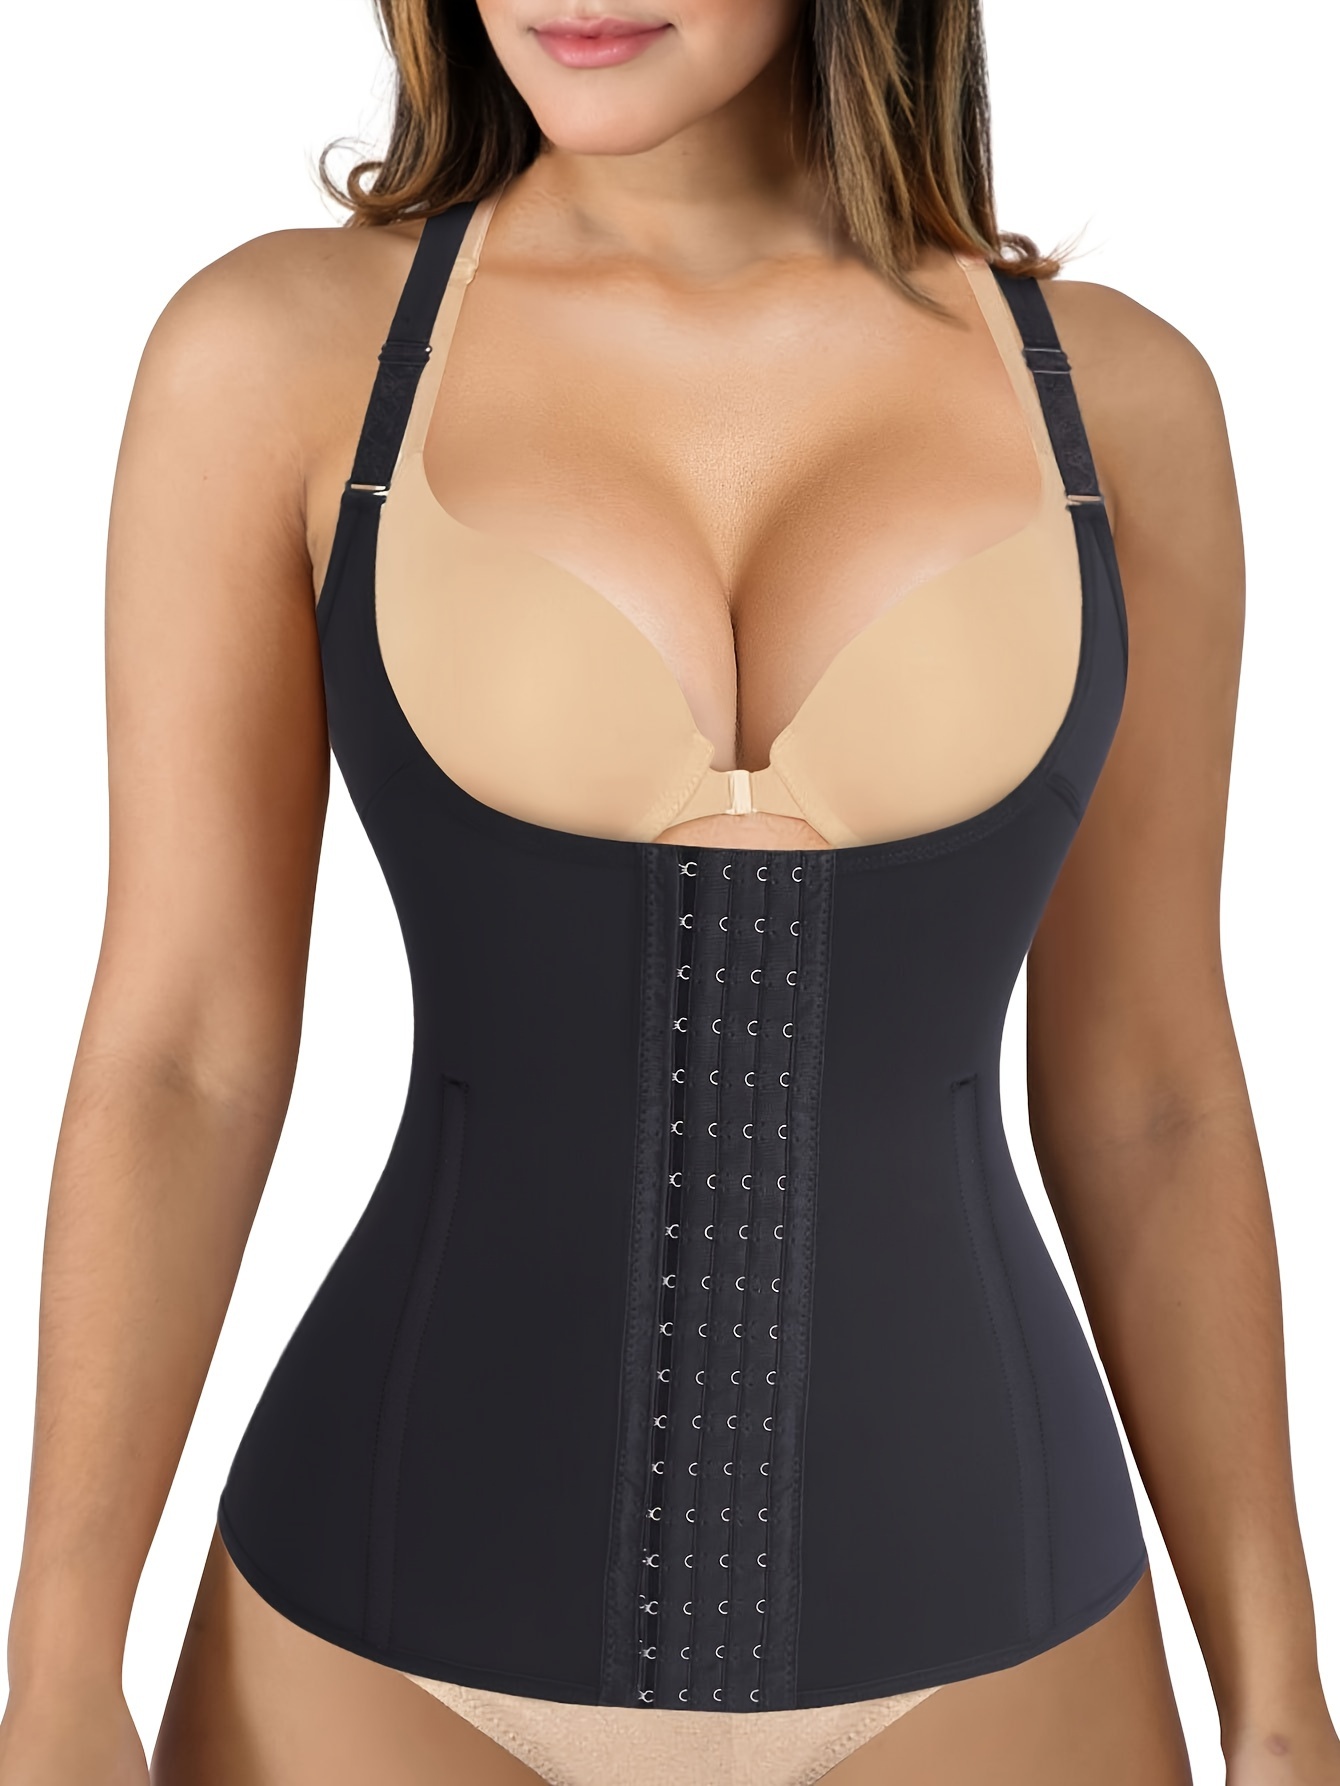 SCARBORO Waist Trainer Corset, Tummy Control Open Bust Shaping Tank Tops,  For Weight Loss Workout, Women's Underwear & Shapewear